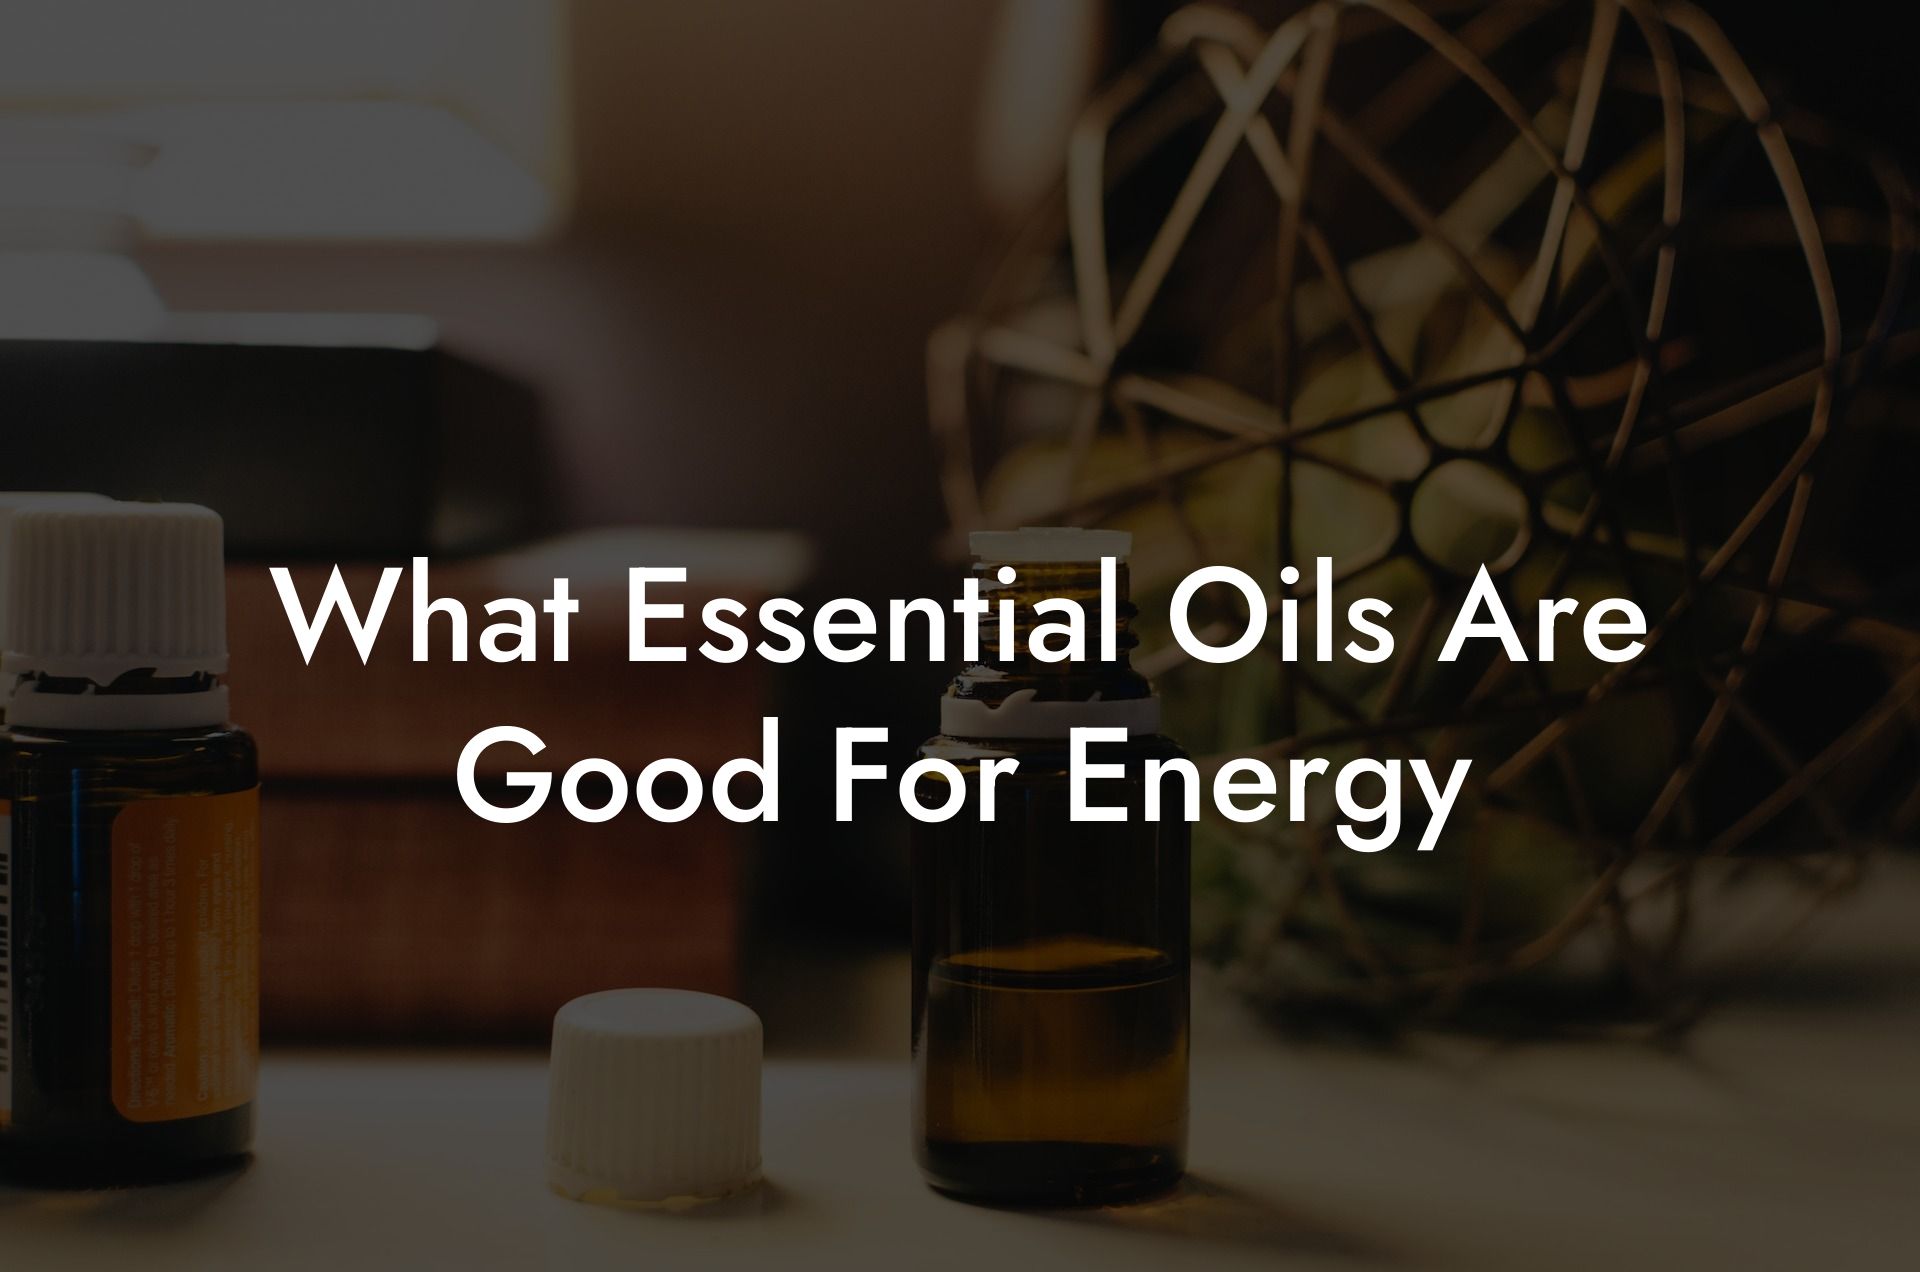 What Essential Oils Are Good For Energy